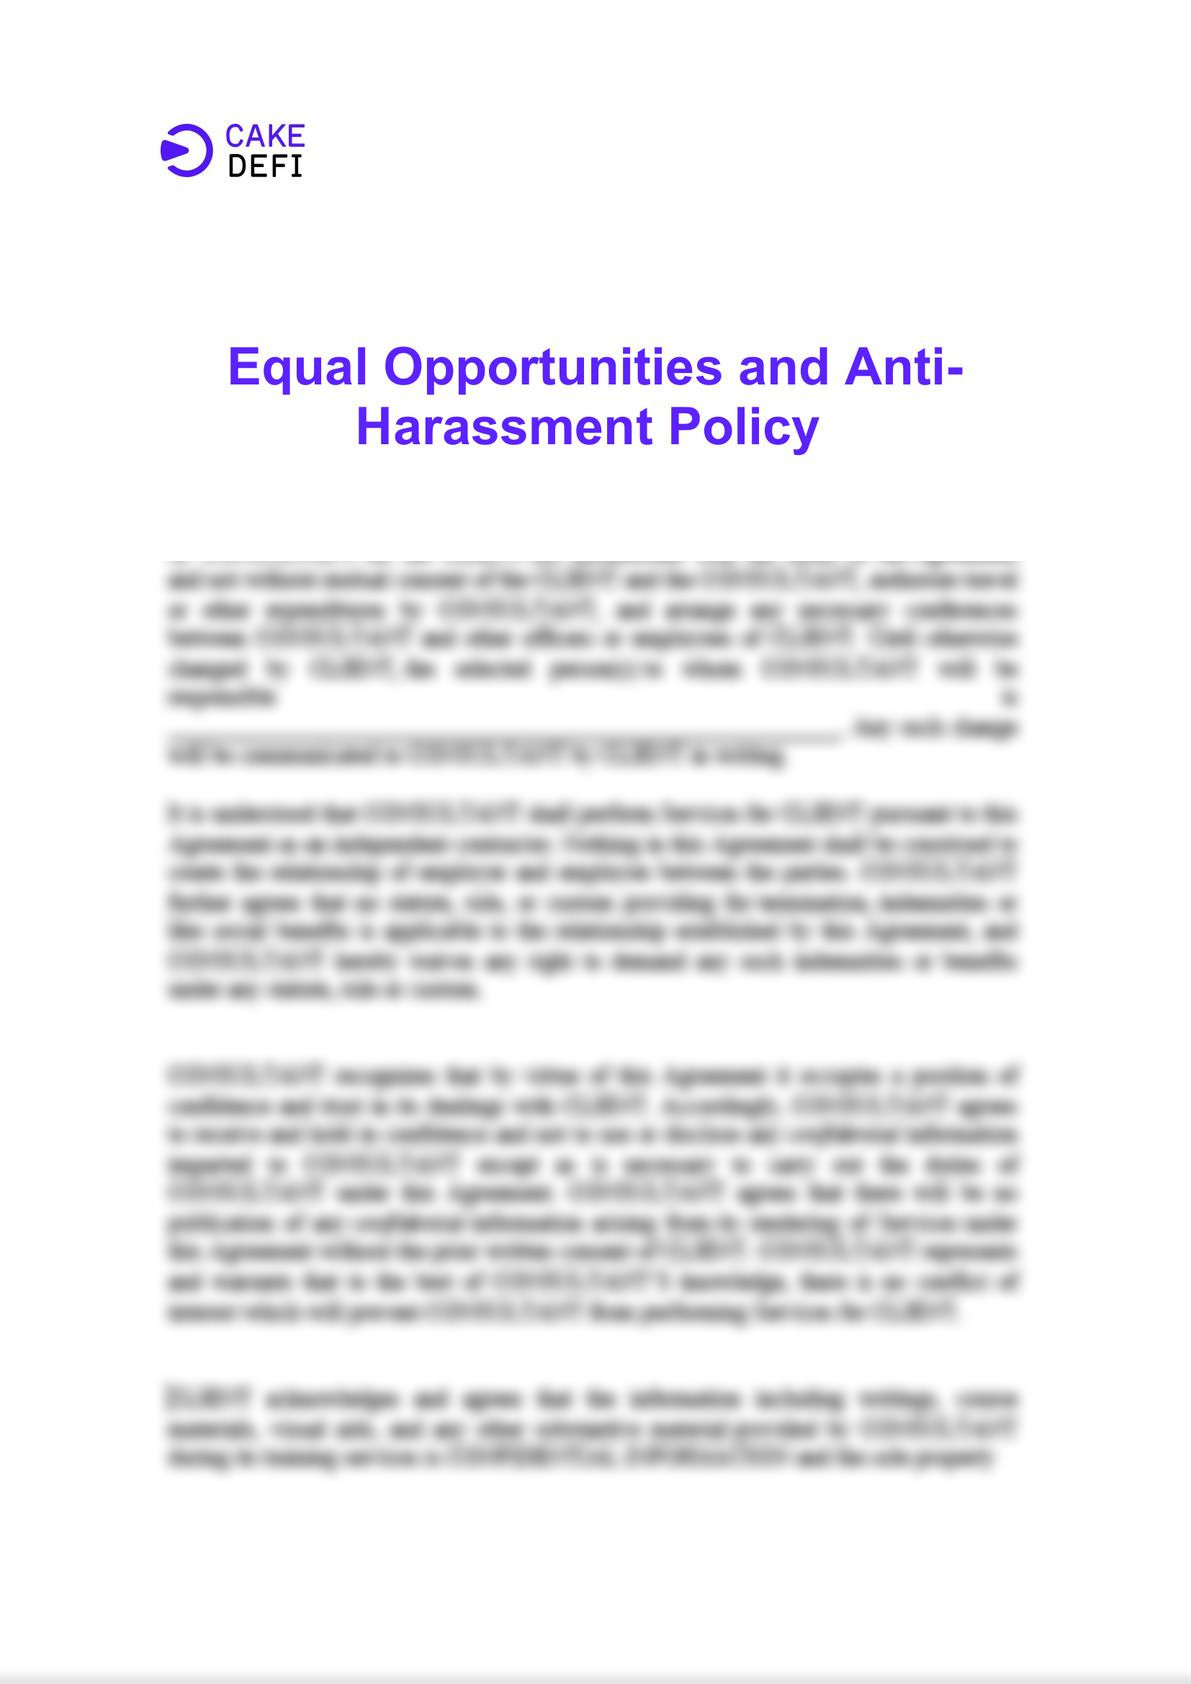 Equal Opportunities and Anti-harassment Policy-0